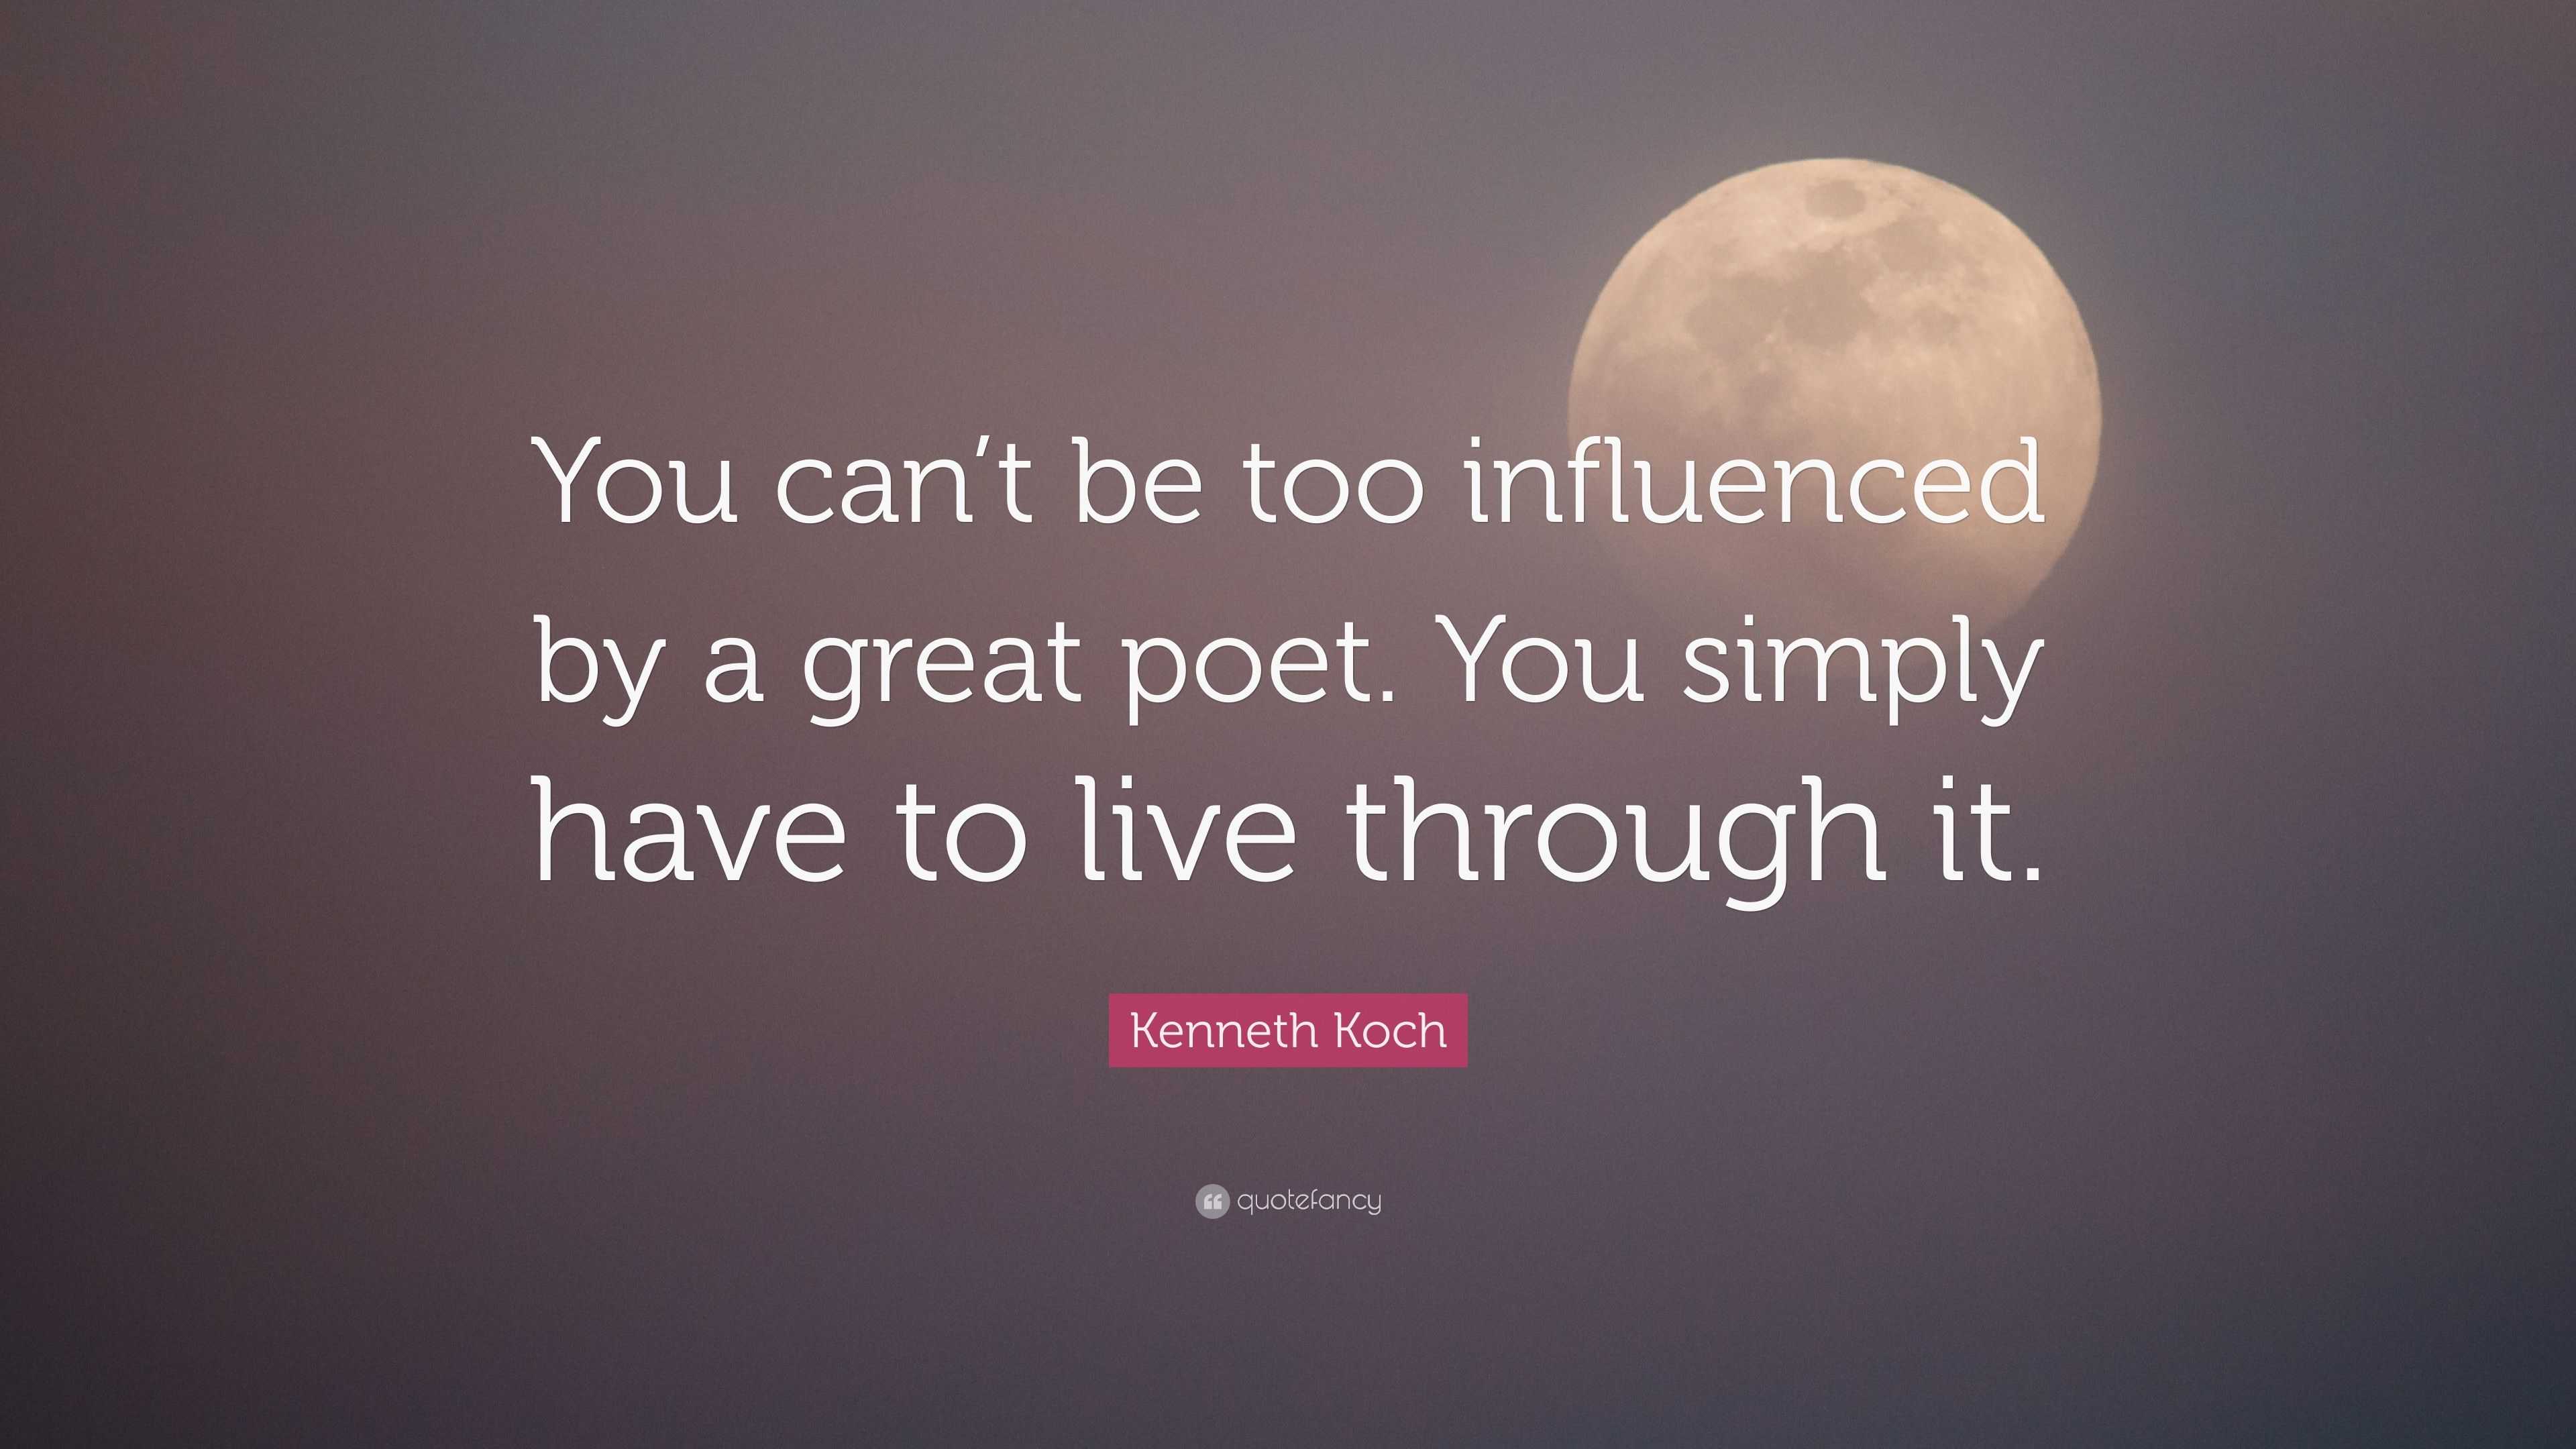 Kenneth Koch Quote: “You can’t be too influenced by a great poet. You ...